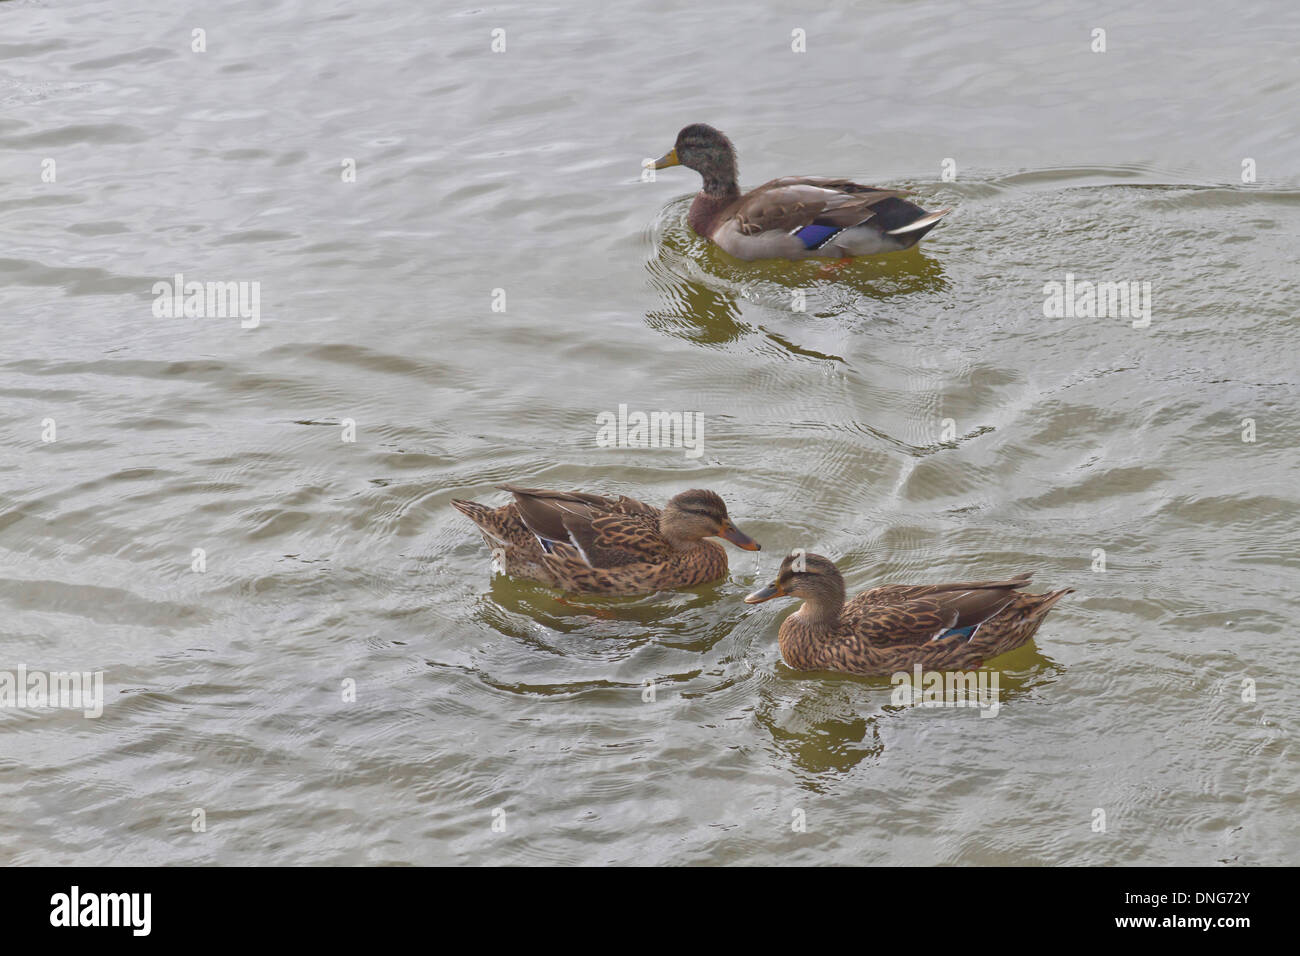 Wild ducks swimming in the waters of Duck, North Carolina in the Outer Banks Stock Photo